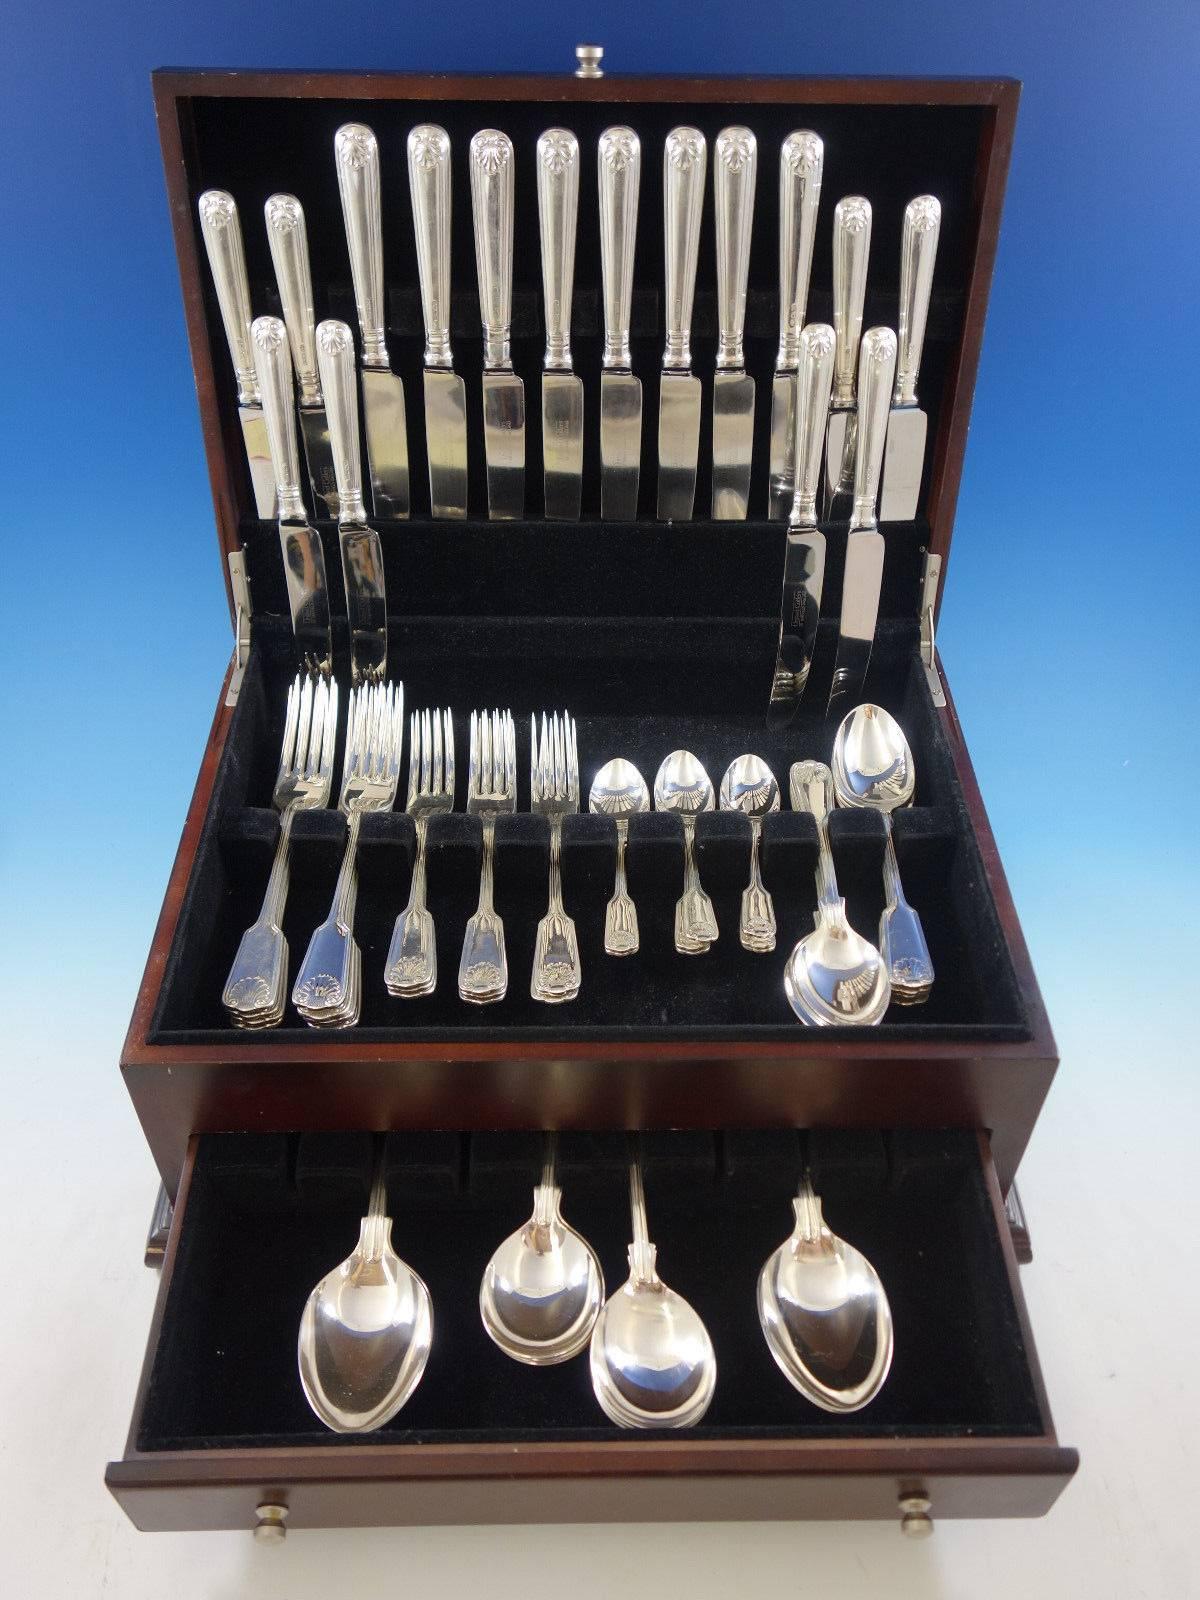 Fiddle Thread & Shell by United Cutlers Ltd. English sterling silver flatware set, 60 pieces. This set includes: 

Eight dinner size knives, 9 7/8